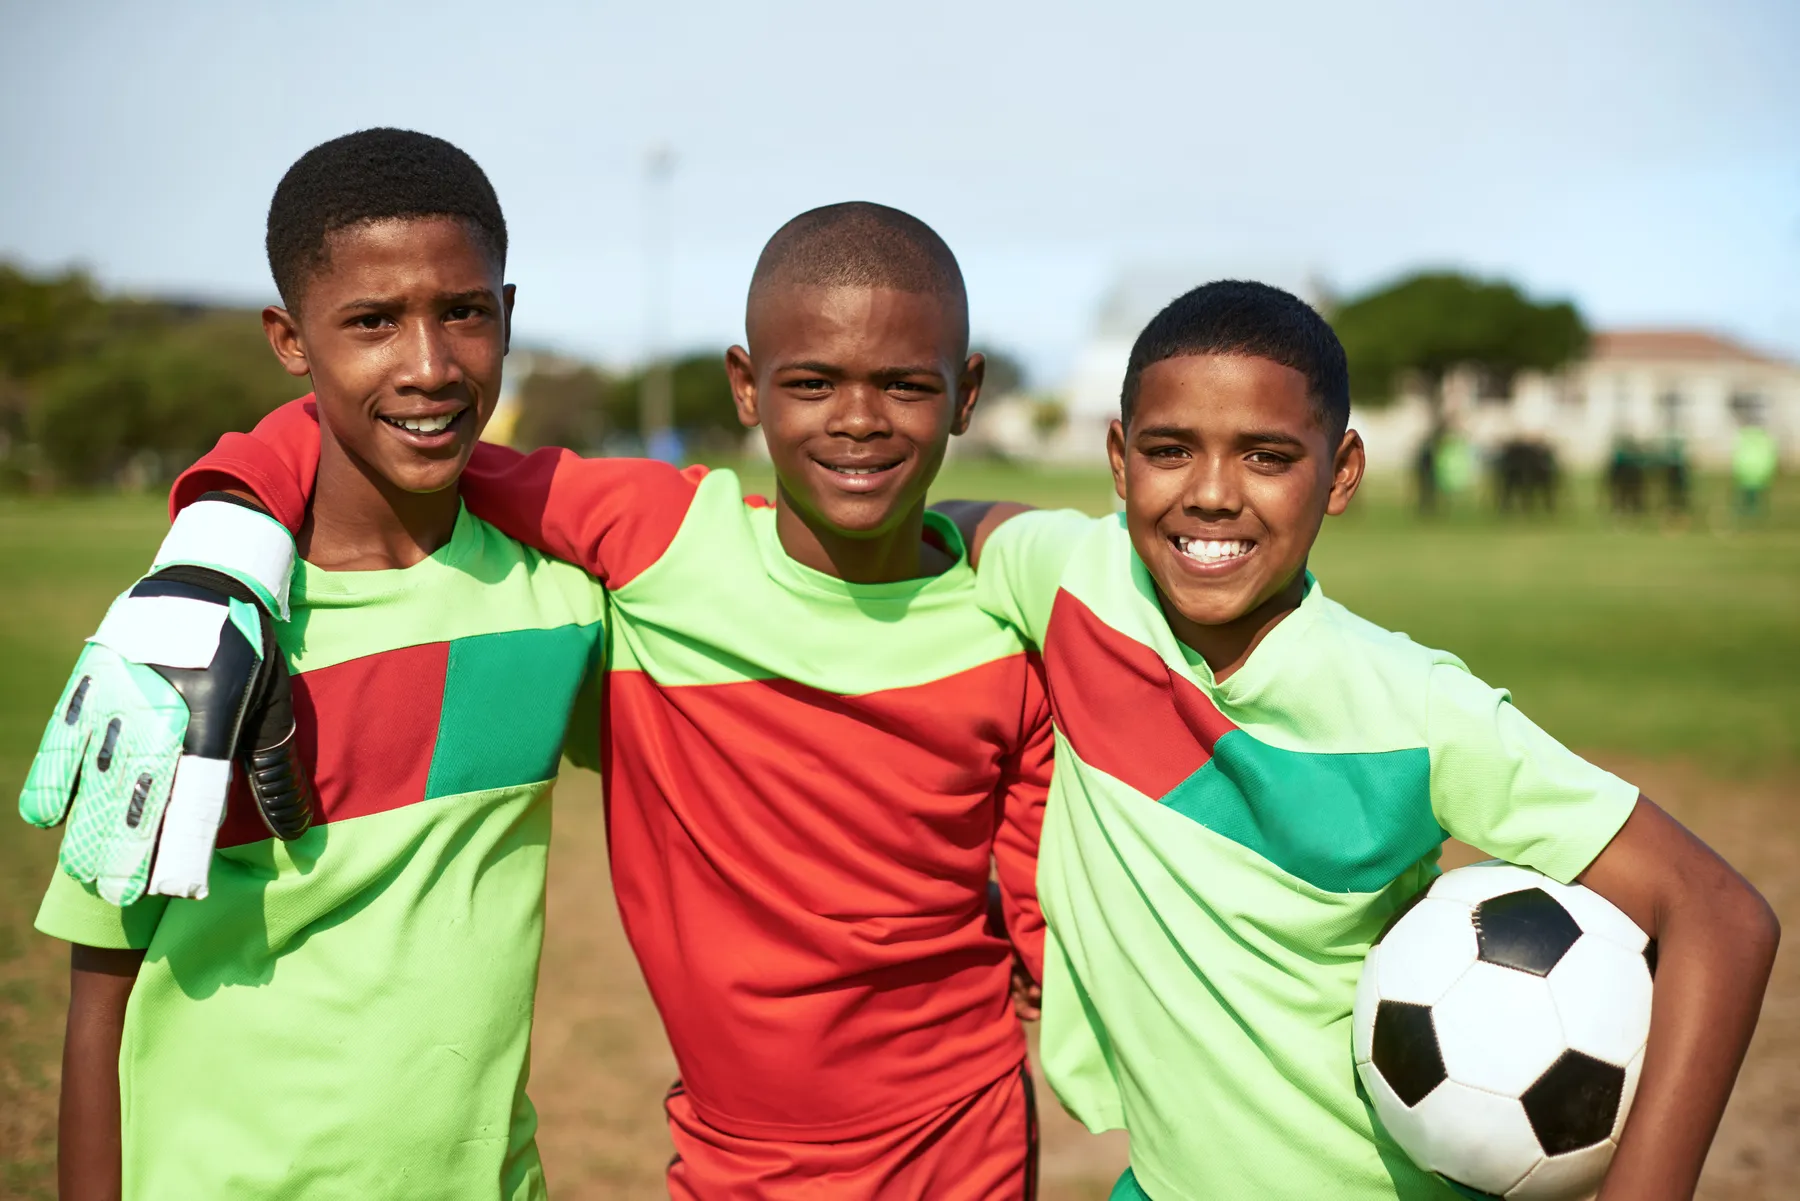 Youth Sports: Helping Kids Develop Important Life Skills